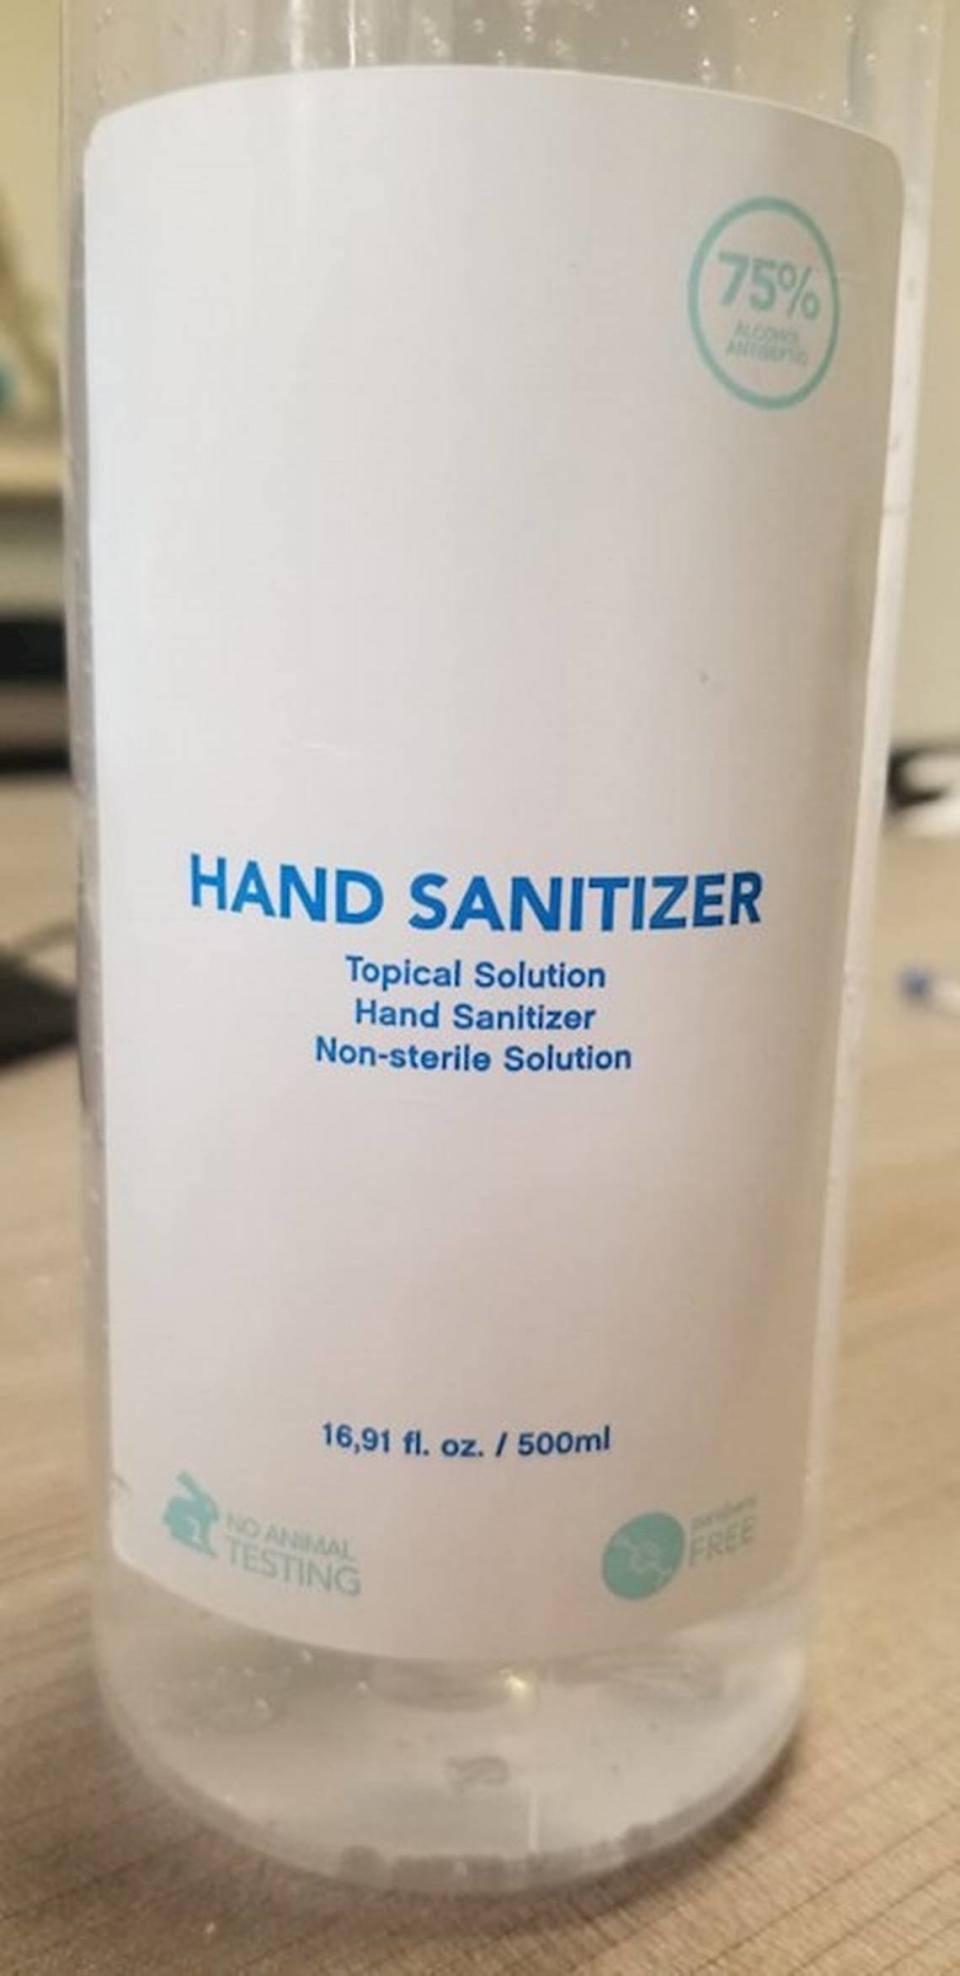 Hand sanitizer imported and distributed by Miami Gardens company Frozen Wheels